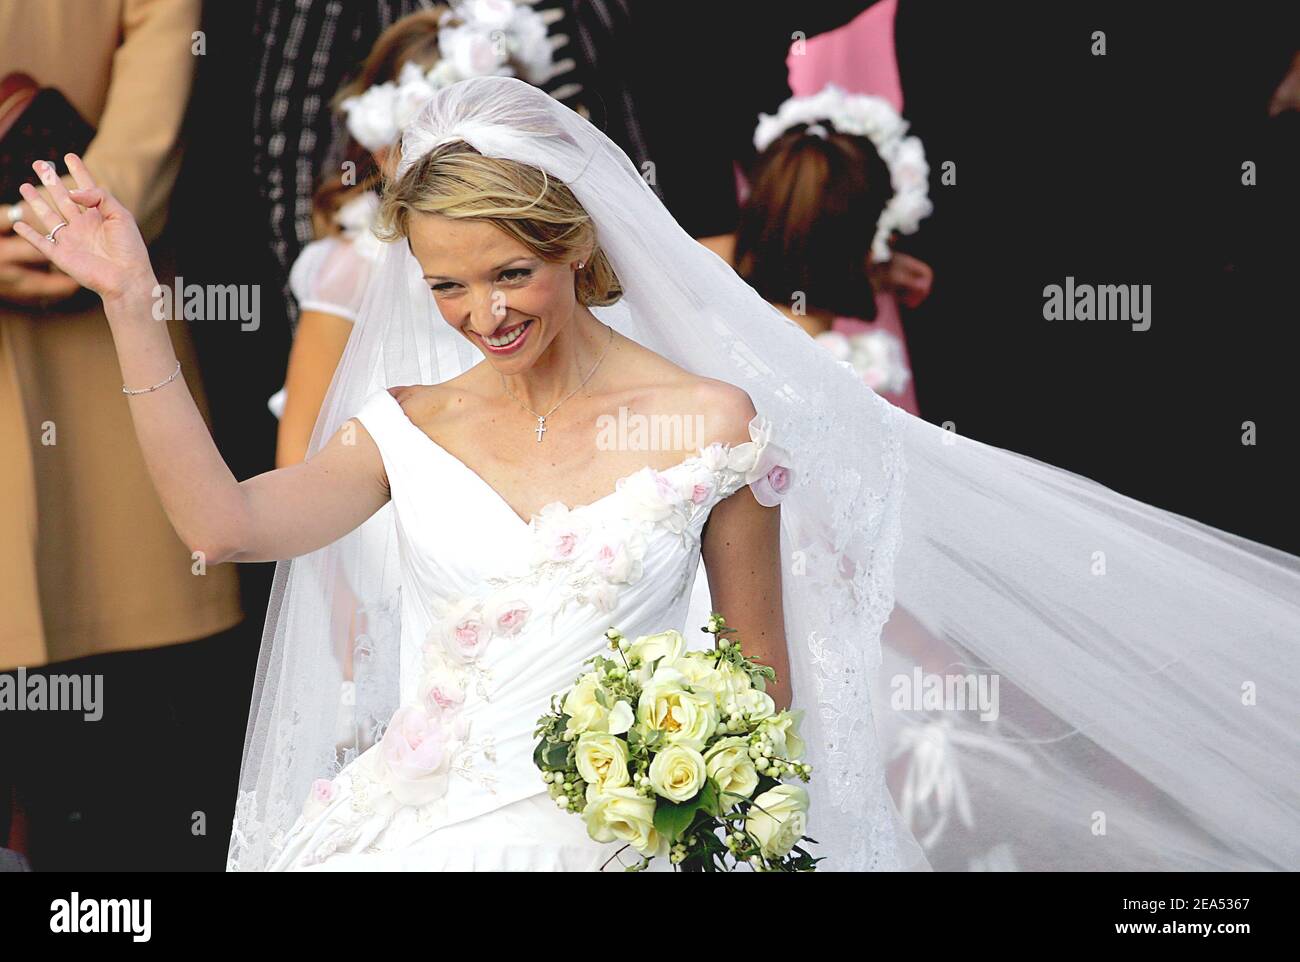 Wedding of Delphine Arnault and Alessandro Gancia in Bazas, South